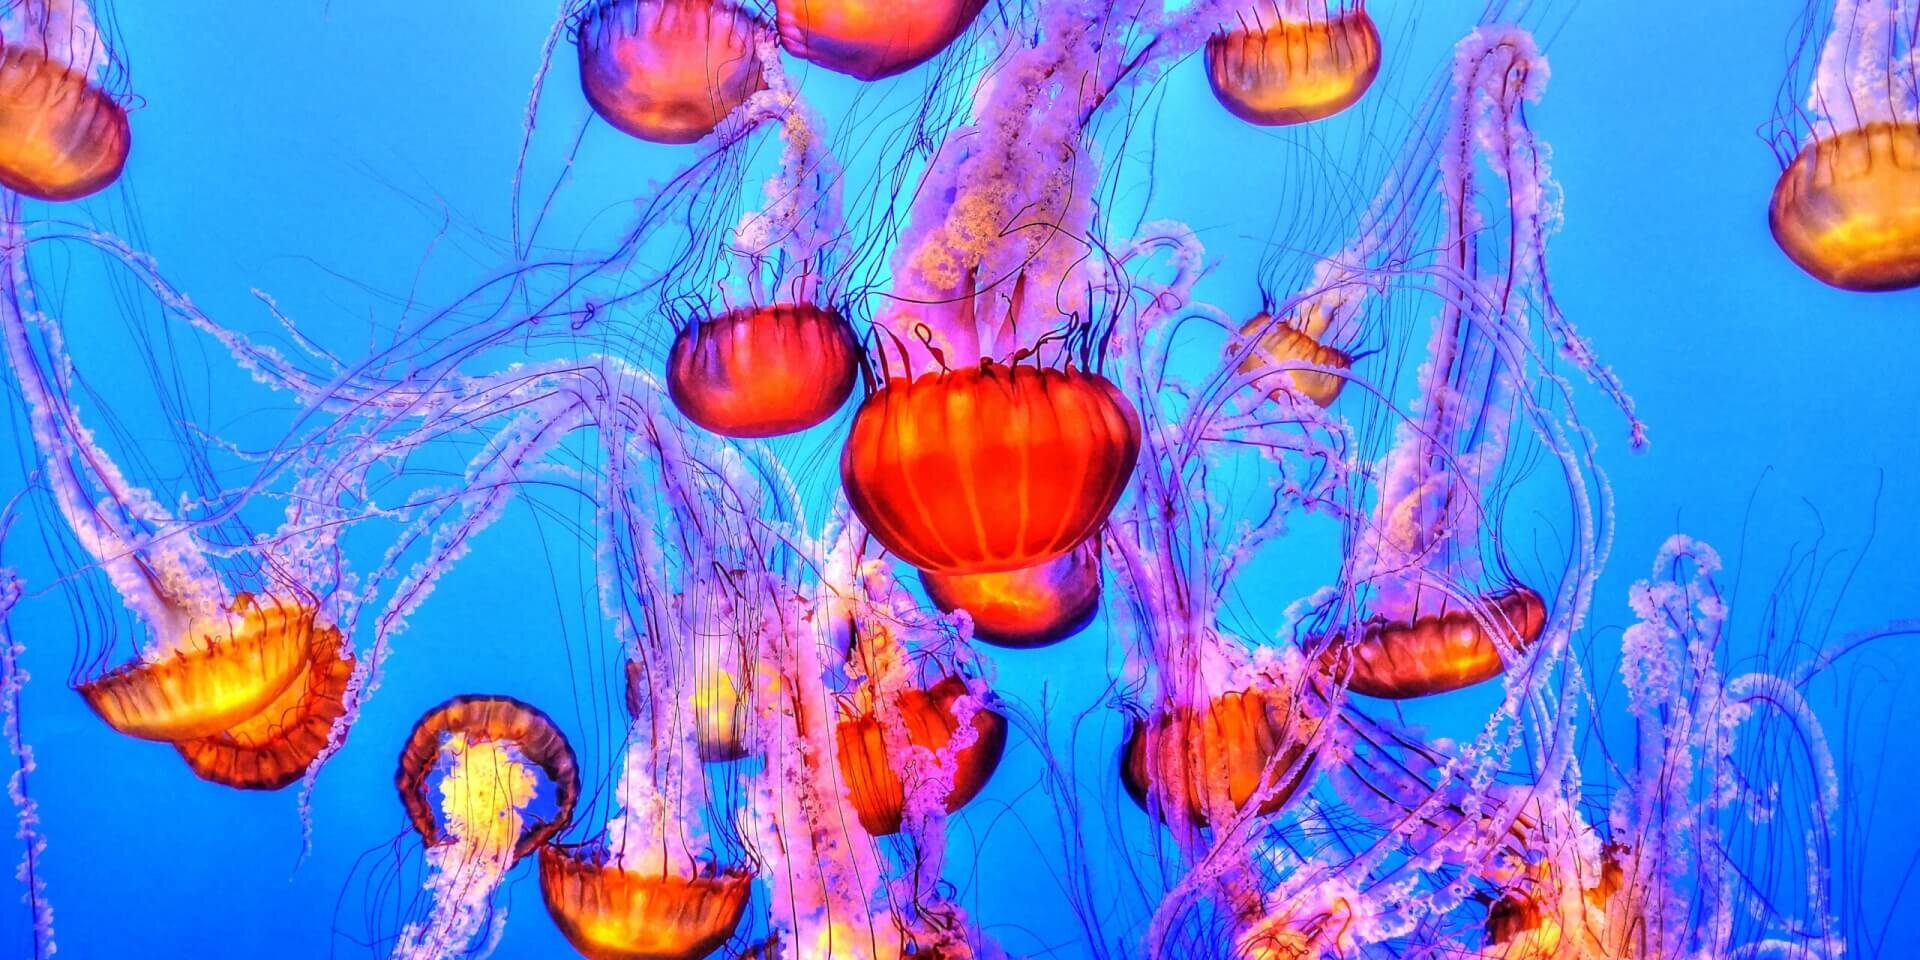 Red and orange jellyfish in the ocean